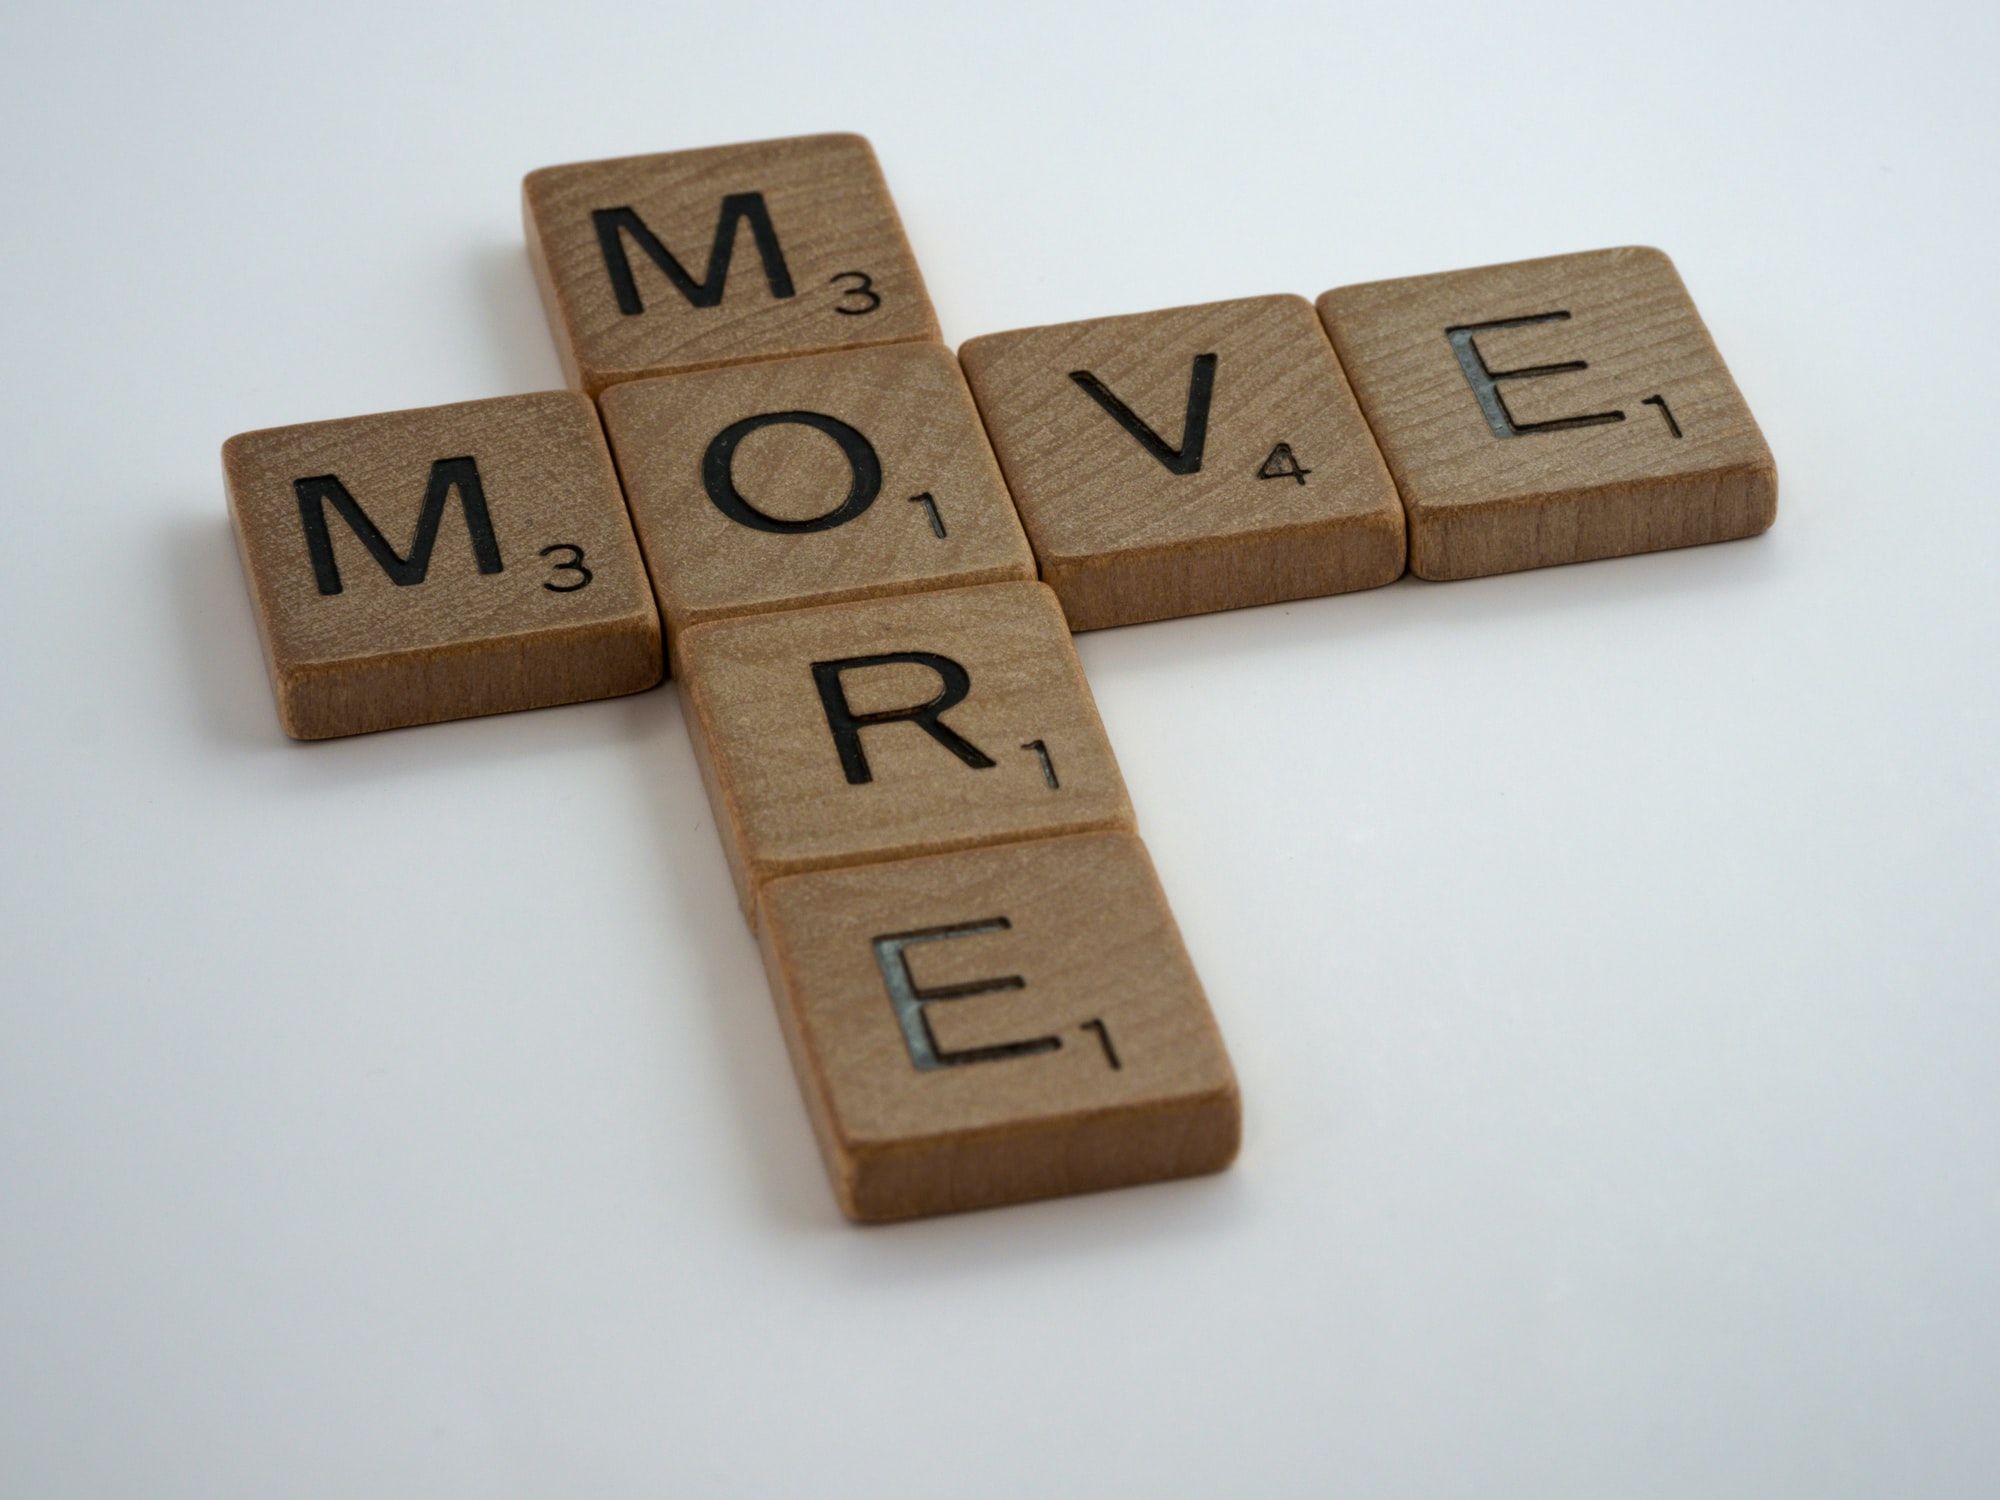 scrabble, scrabble pieces, lettering, letters, wood, scrabble tiles, white background, words, quote, move more, move, more, exercise, health, healthy lifestyle, step out, walk, get out of your seat, stop sitting, lazy, couch potato,
